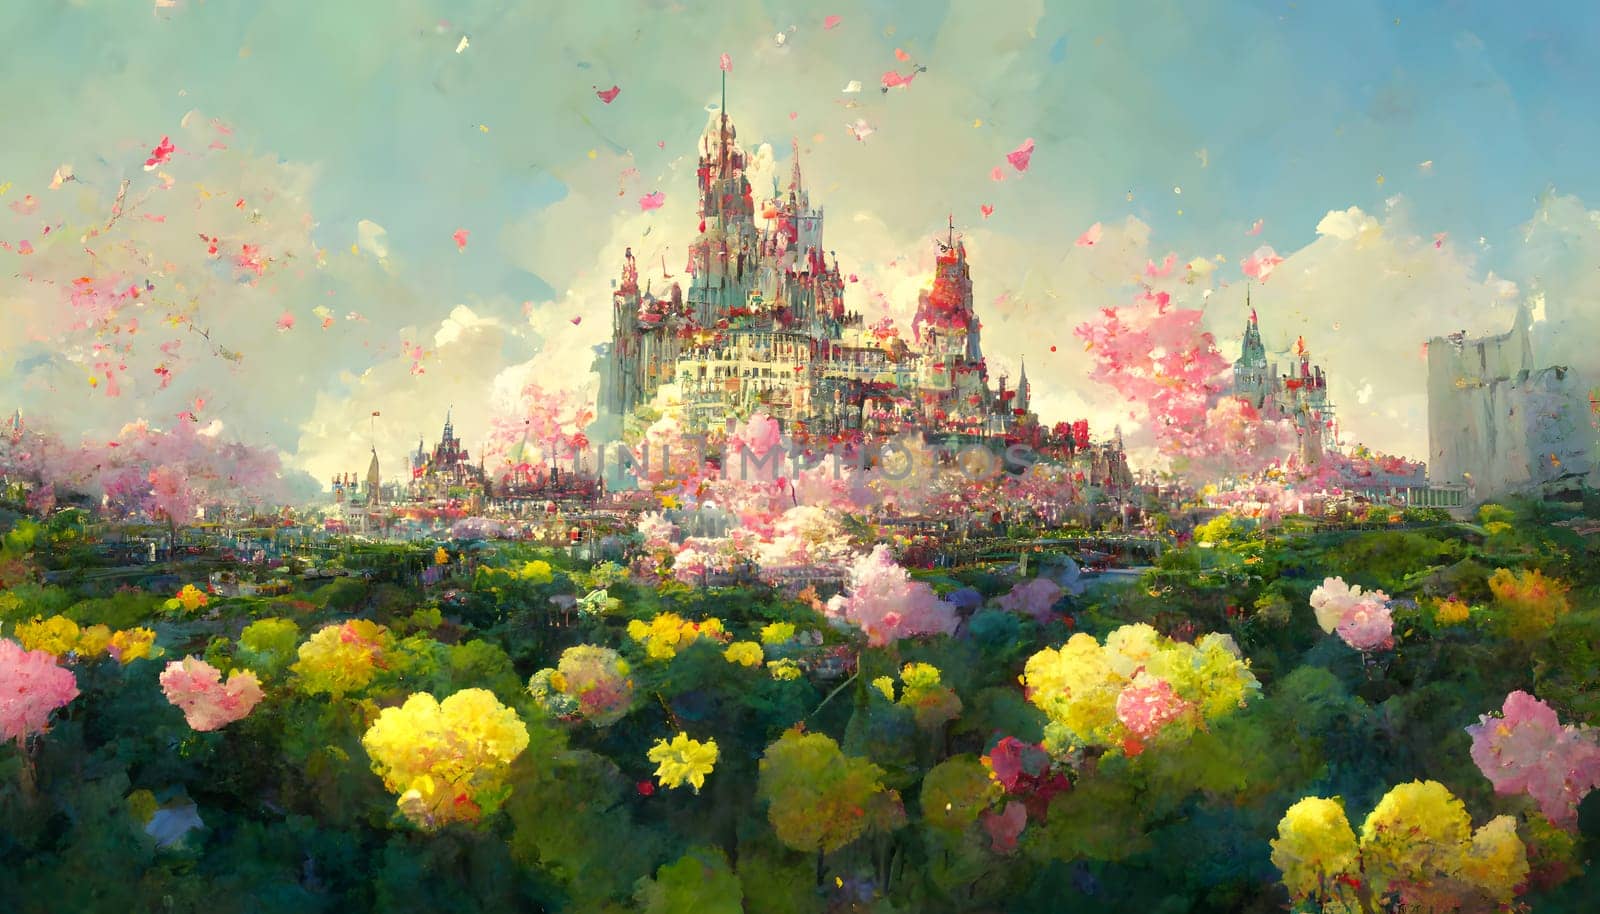 dreamy castles at sunny spring day with pink and yellow flowers in foreground, neural network generated art. Digitally generated image. Not based on any actual scene or pattern.